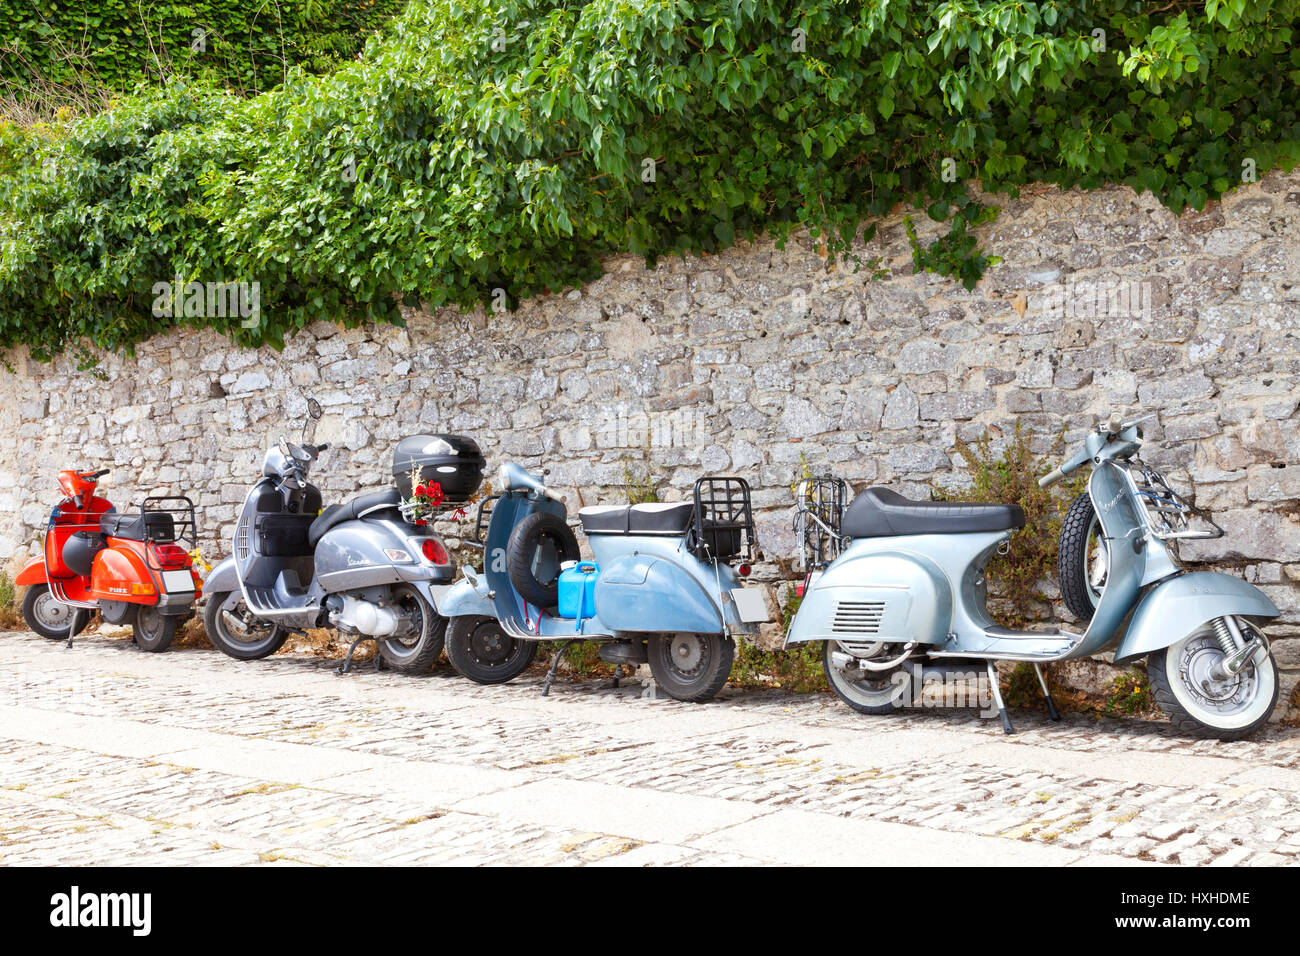 Erice, Sicily, Italy - June 13 2016: Red and blue retro Italian scooters Vespa parked on a road by a stone wall . Stock Photo